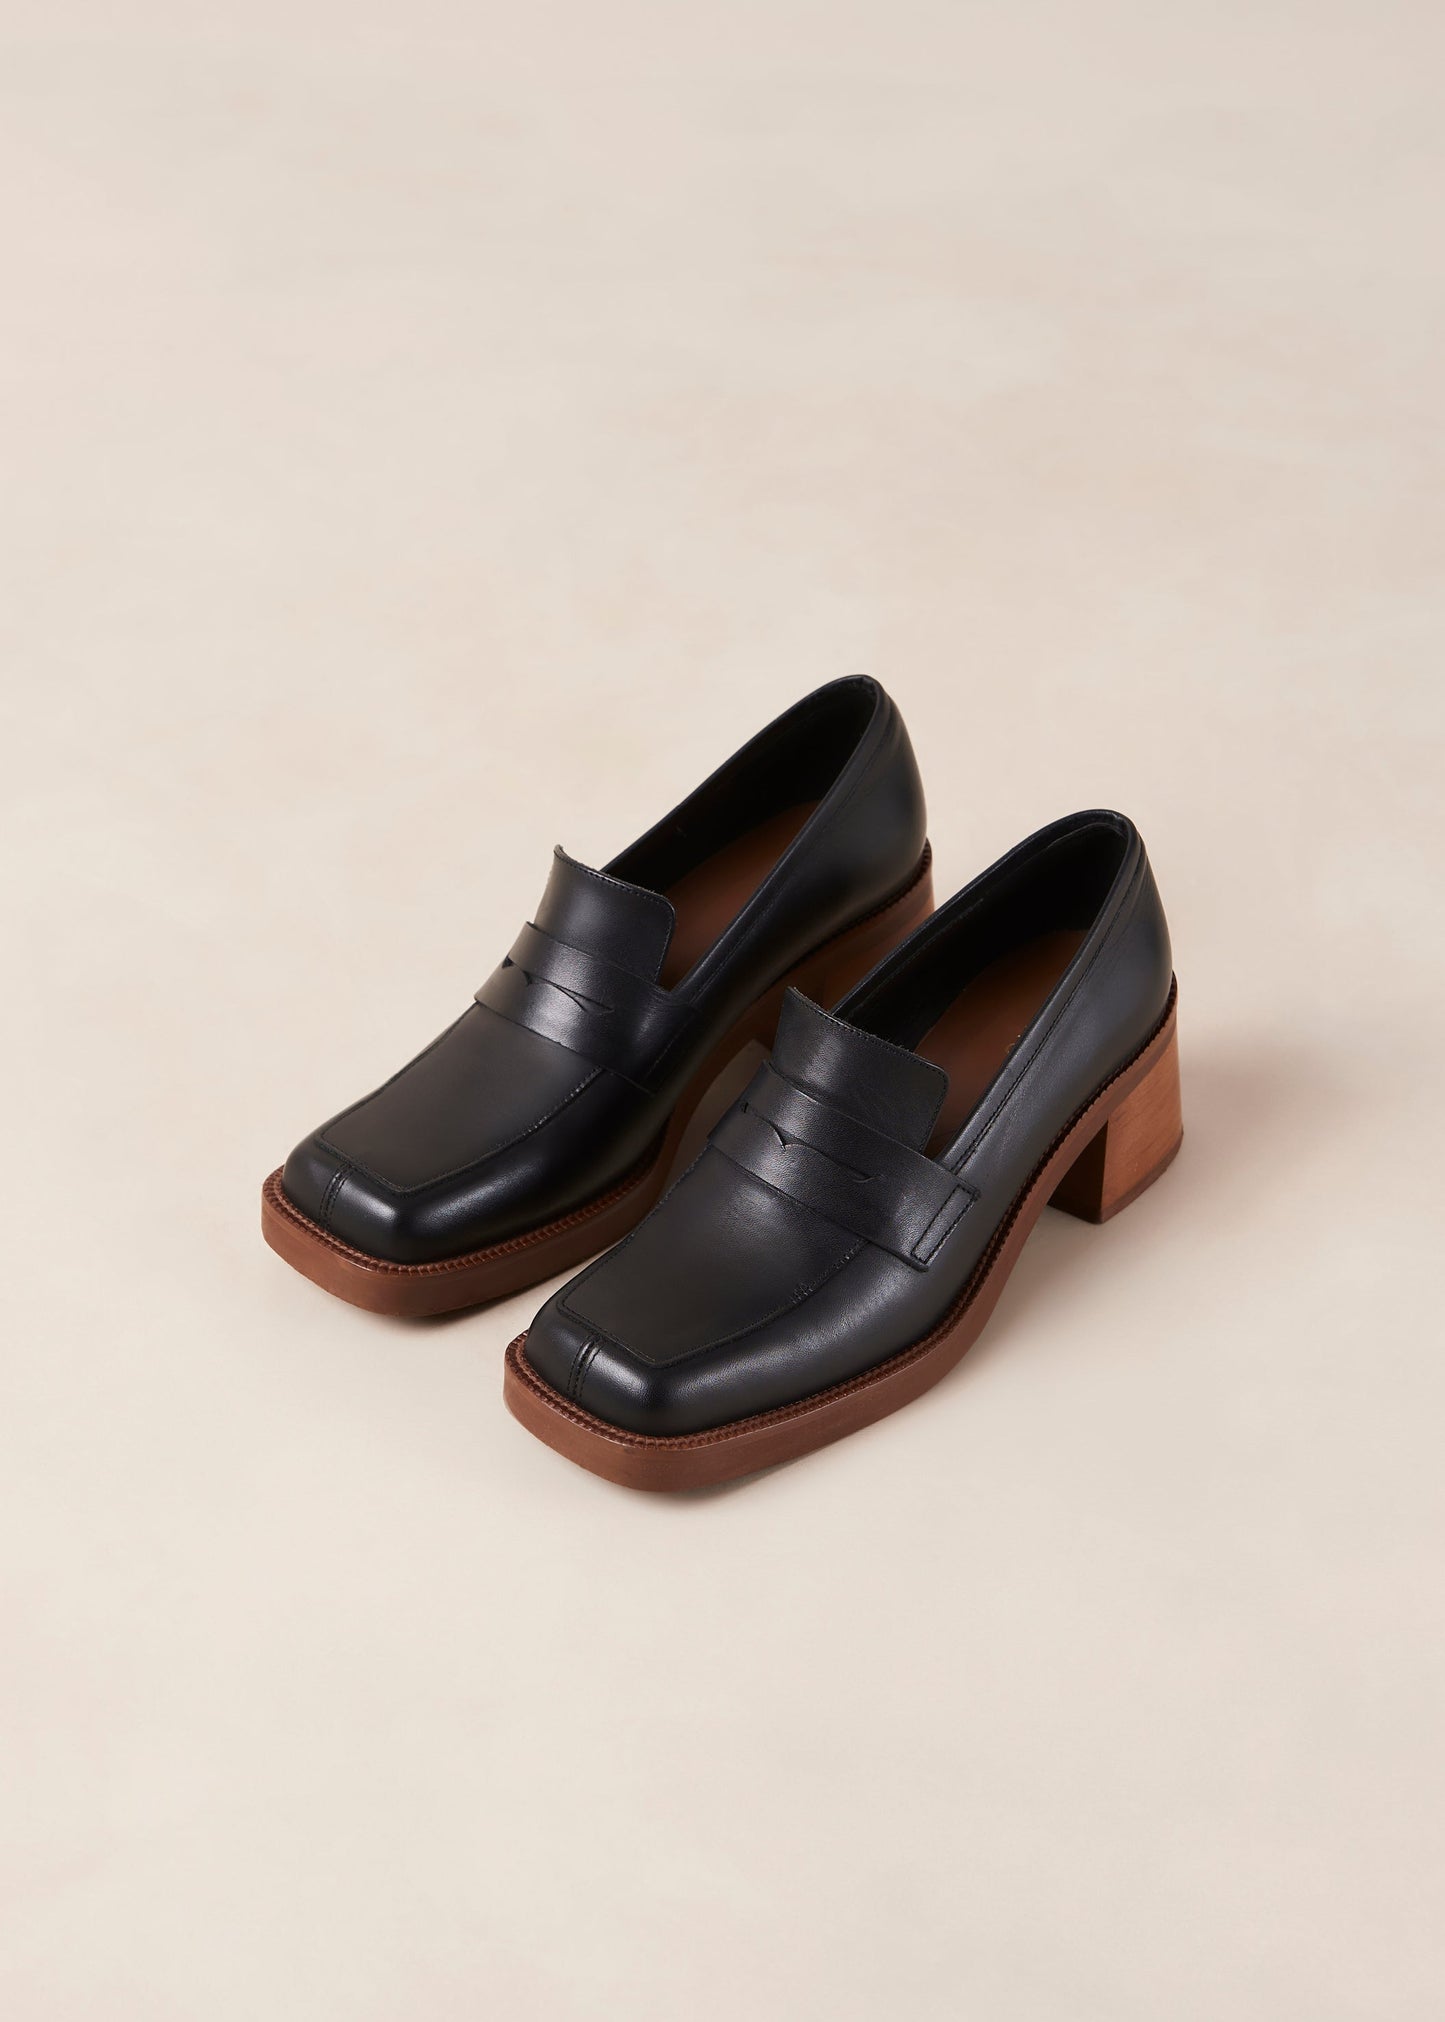 If you are always game for extra height, Roxanne is the loafer-pump hybrid you have been craving for. Think your evergreen moccasin silhouette set atop a chunky block heel for a little flattering elevation. They come in premium black leather and feature the classic penny tab across the vamp. Sustainably made in Spain. Alohas Roxanne Black Leather Loafer.